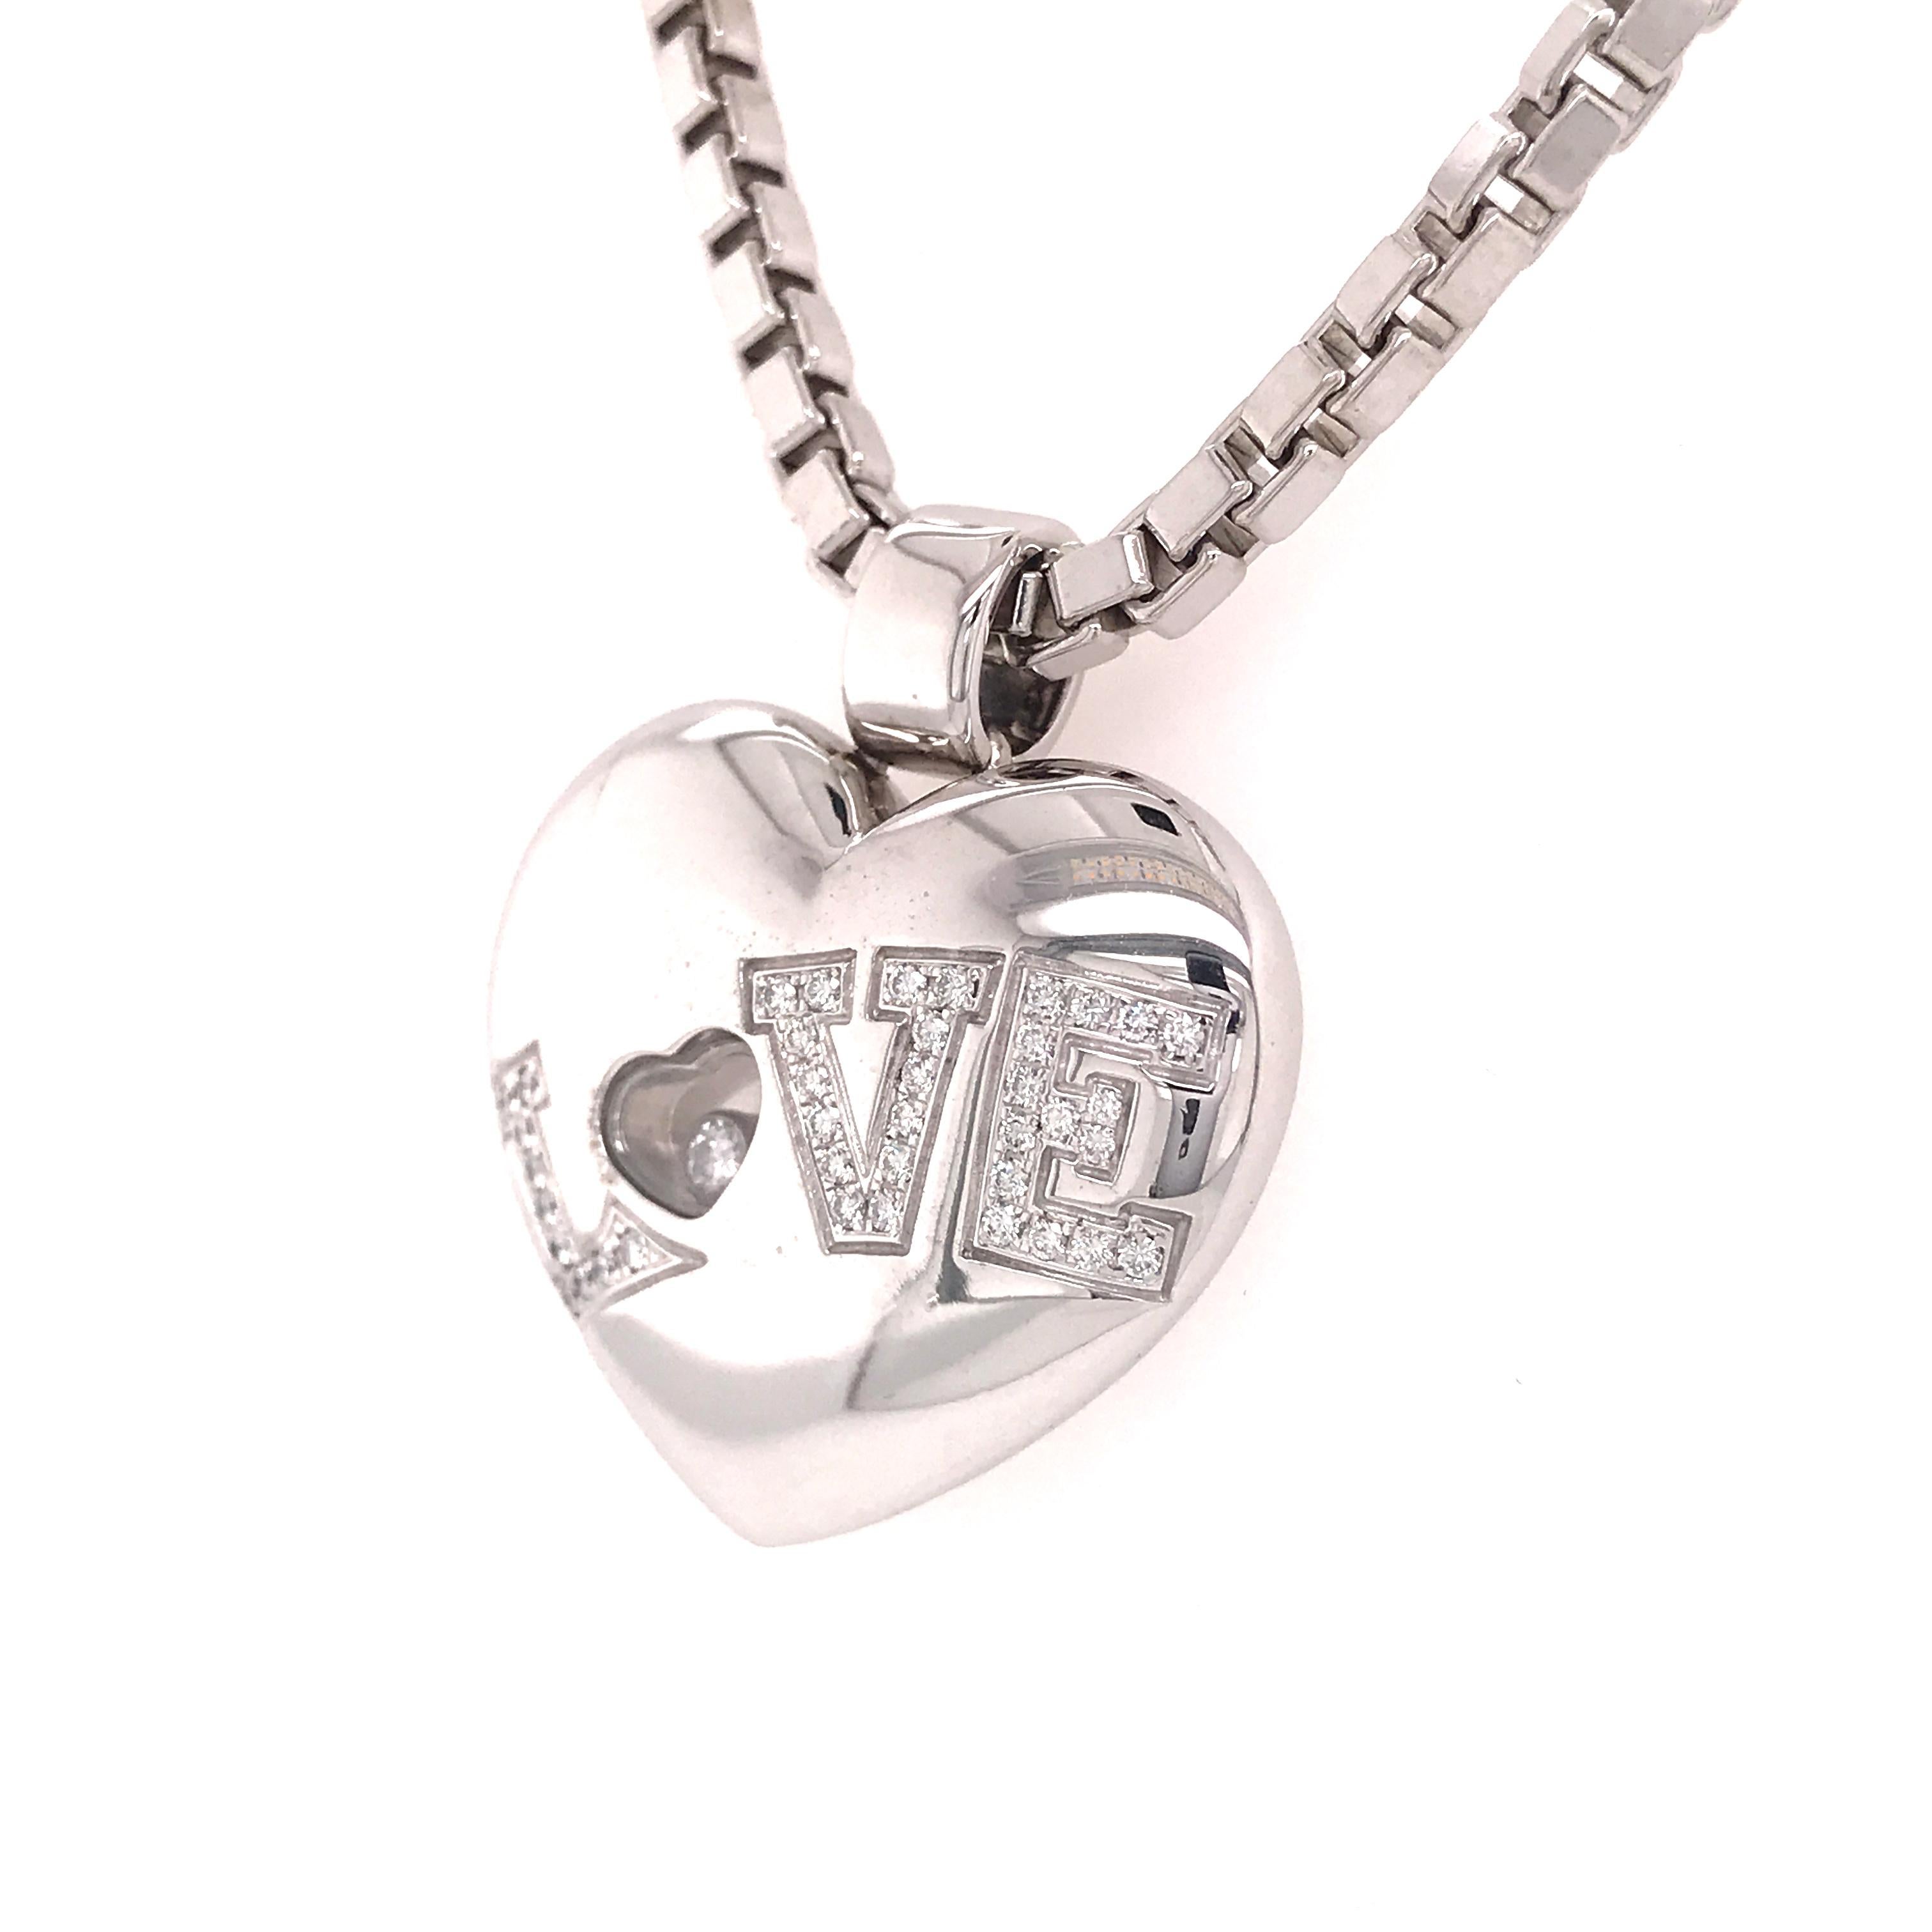 Chopard ‘Love’ Pendant and Chain in 18K White Gold. A heart-shaped pendant with (40) Round Brilliant Cut Diamonds weighing .25 carat total weight, E-F in color and VS in clarity set in letters spelling “Love”, and with a glassed compartment